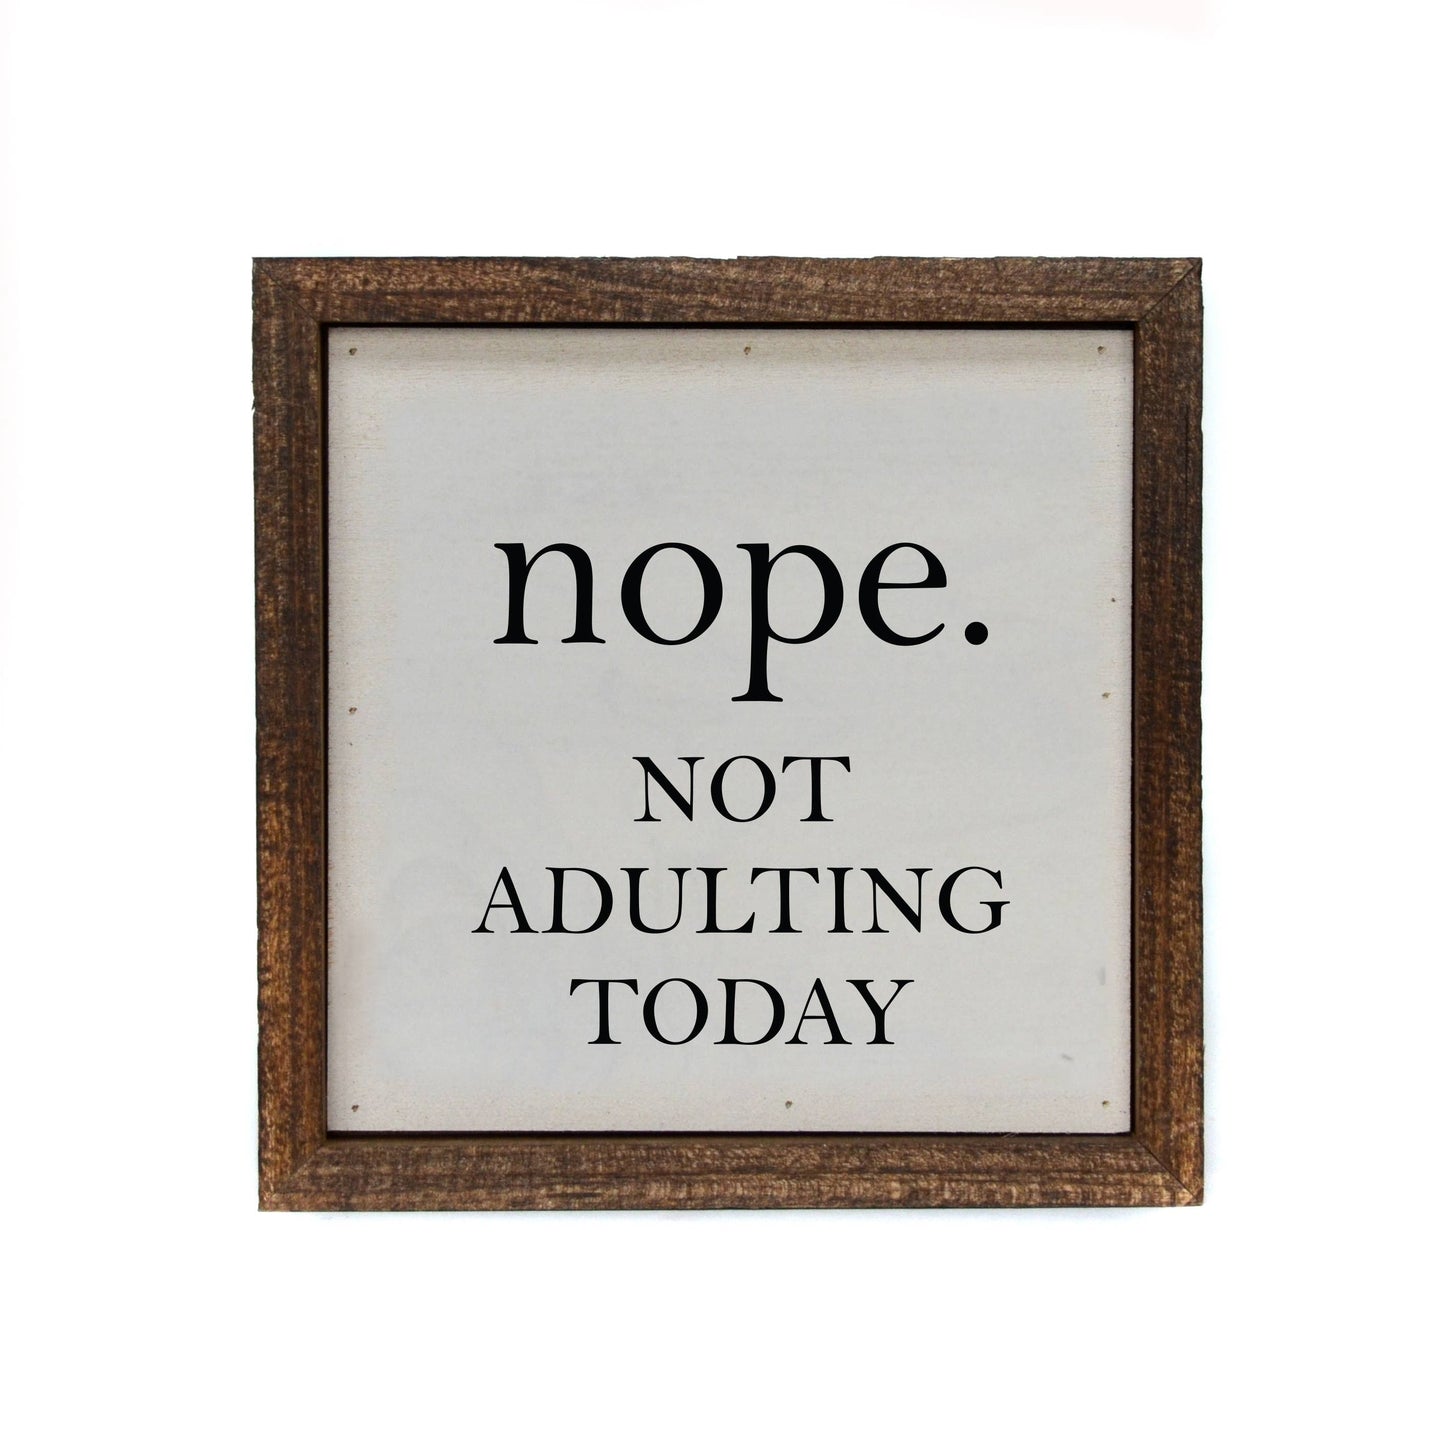 Nope. Not Adulting Today Small 6x6  Sign or Shelf Sitter - Hidden Gems Novelty